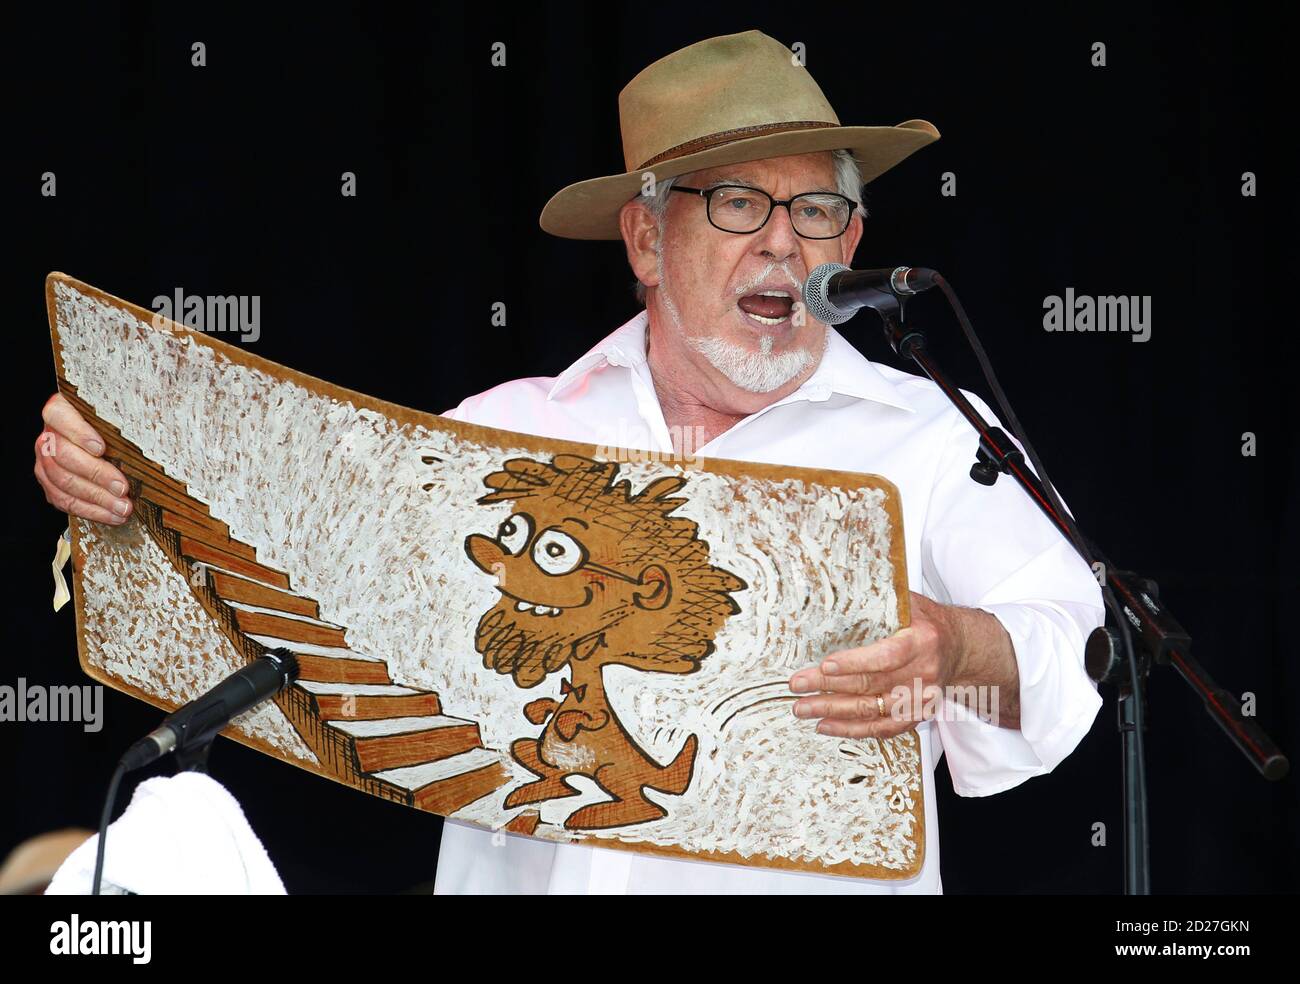 Rolf Harris Singer High Resolution Stock Photography and Images - Alamy